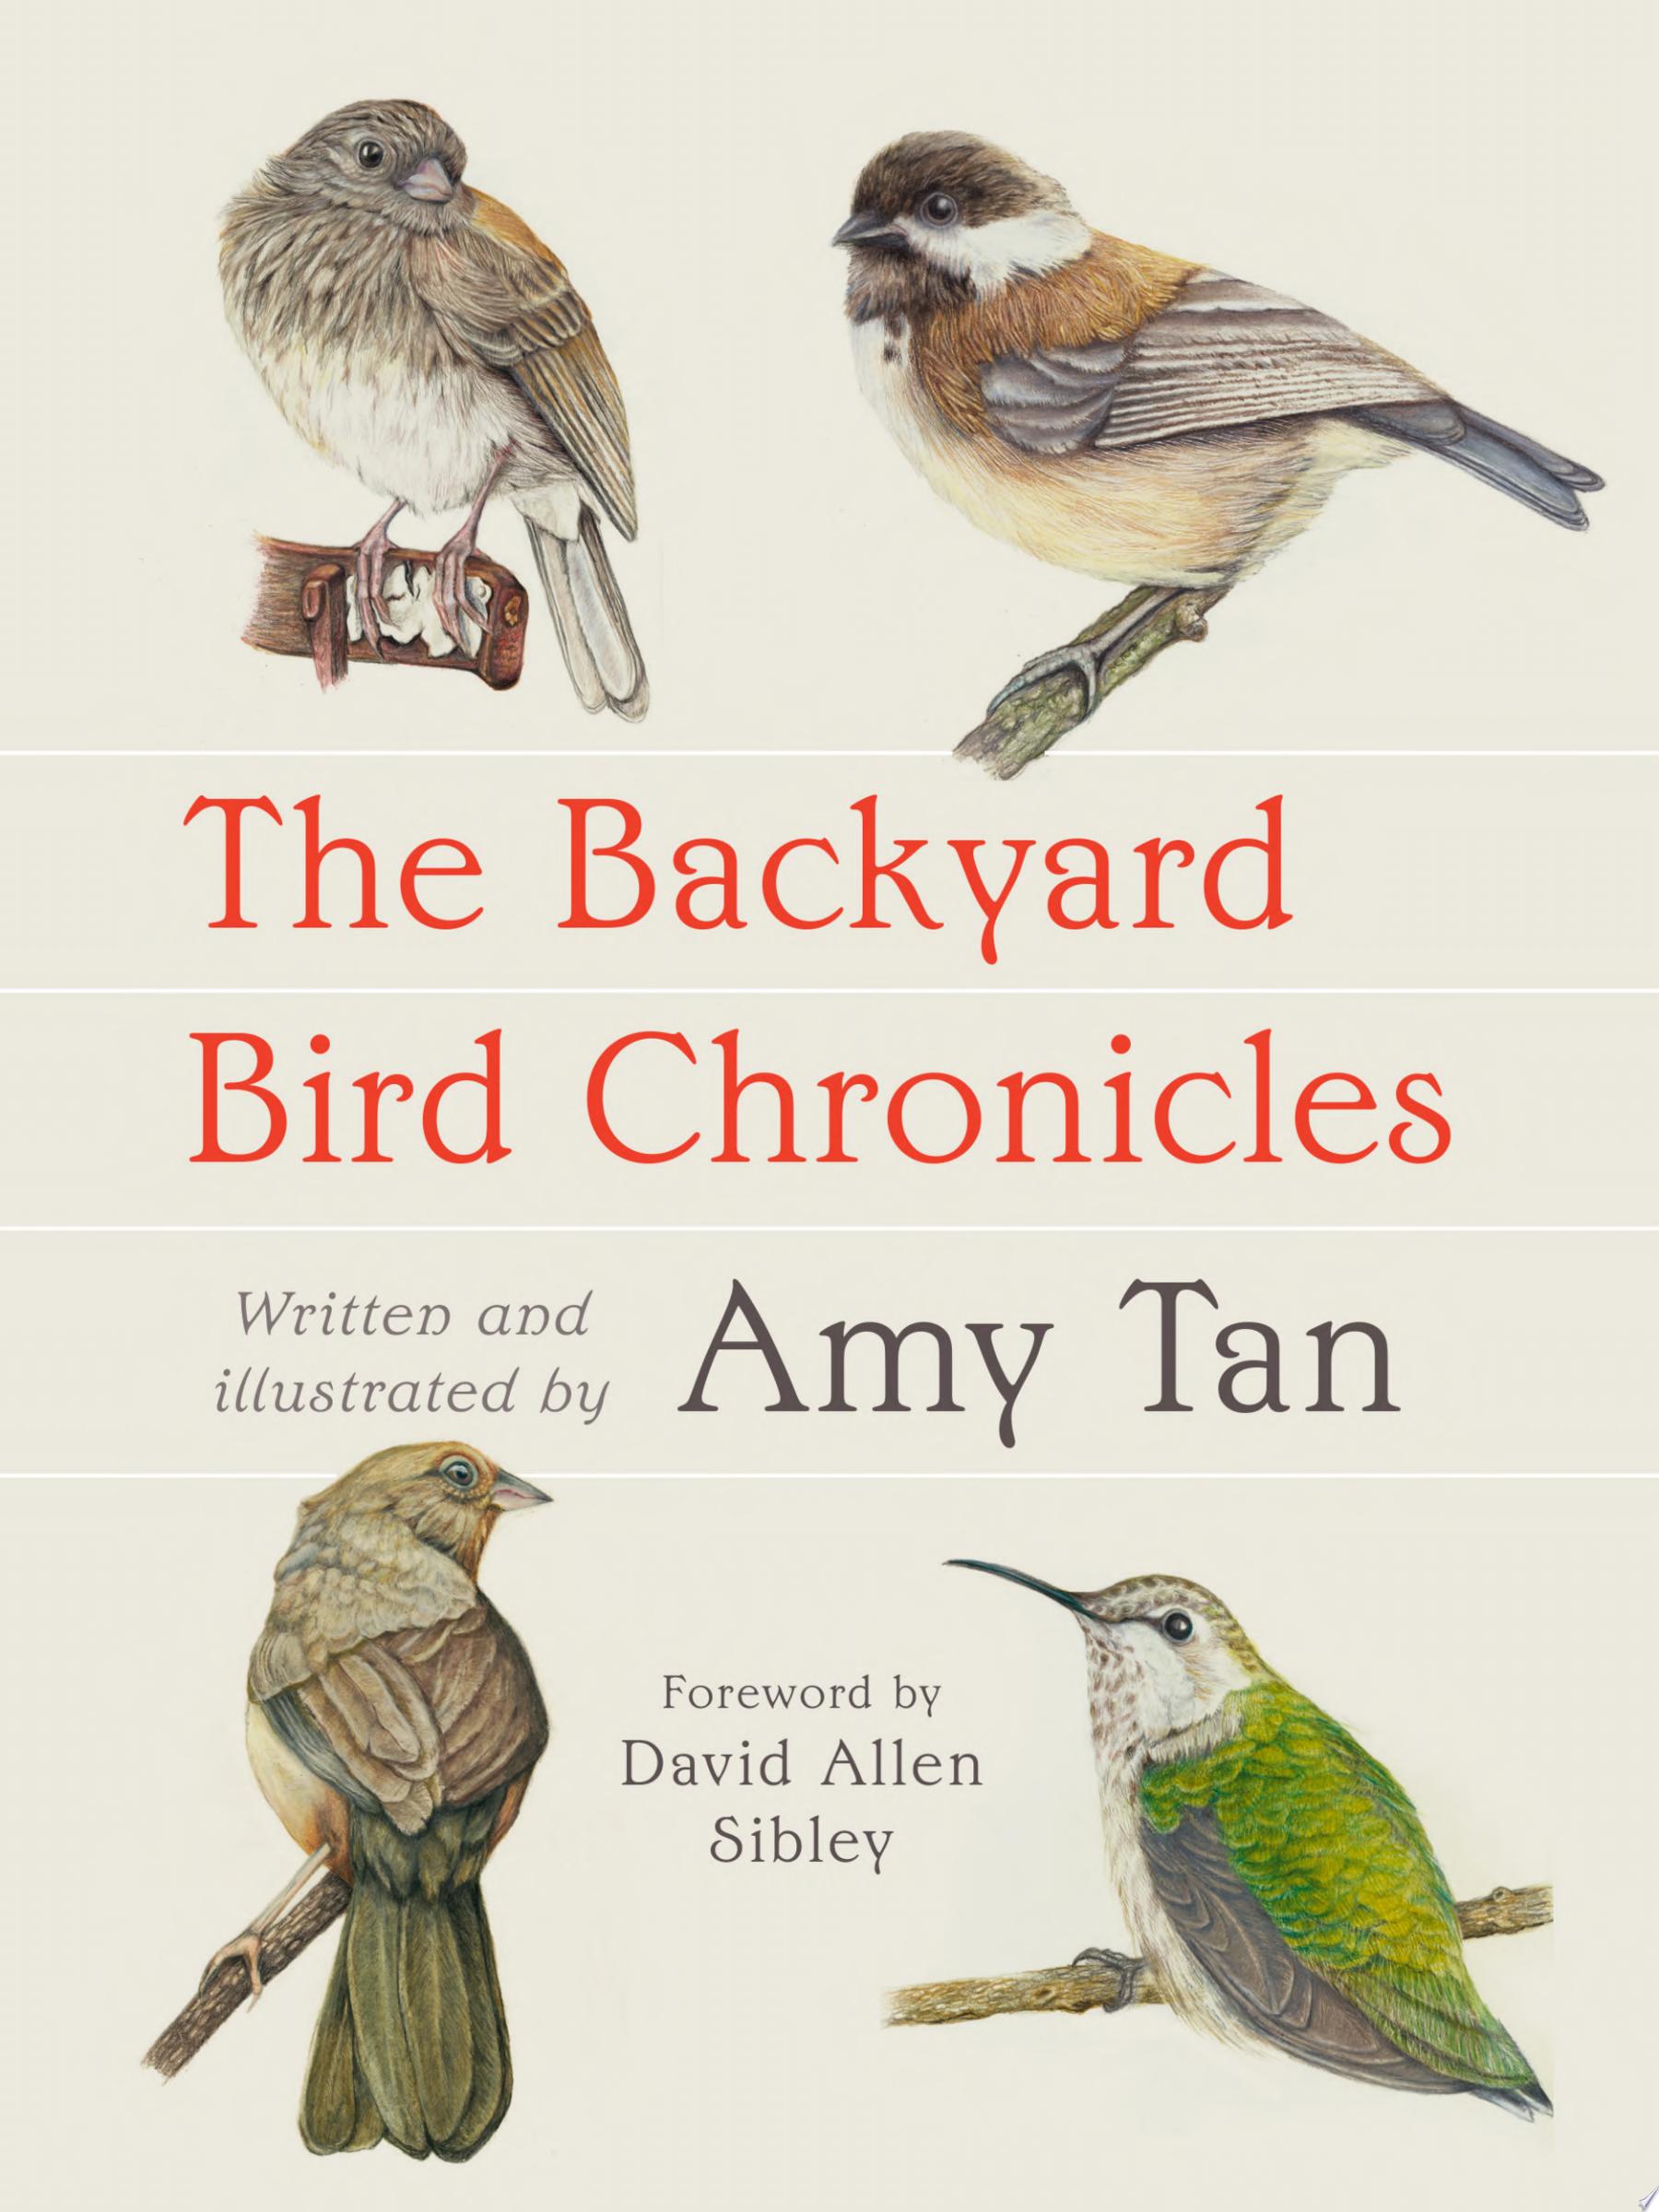 book cover for "The Backyard Bird Chronicles"